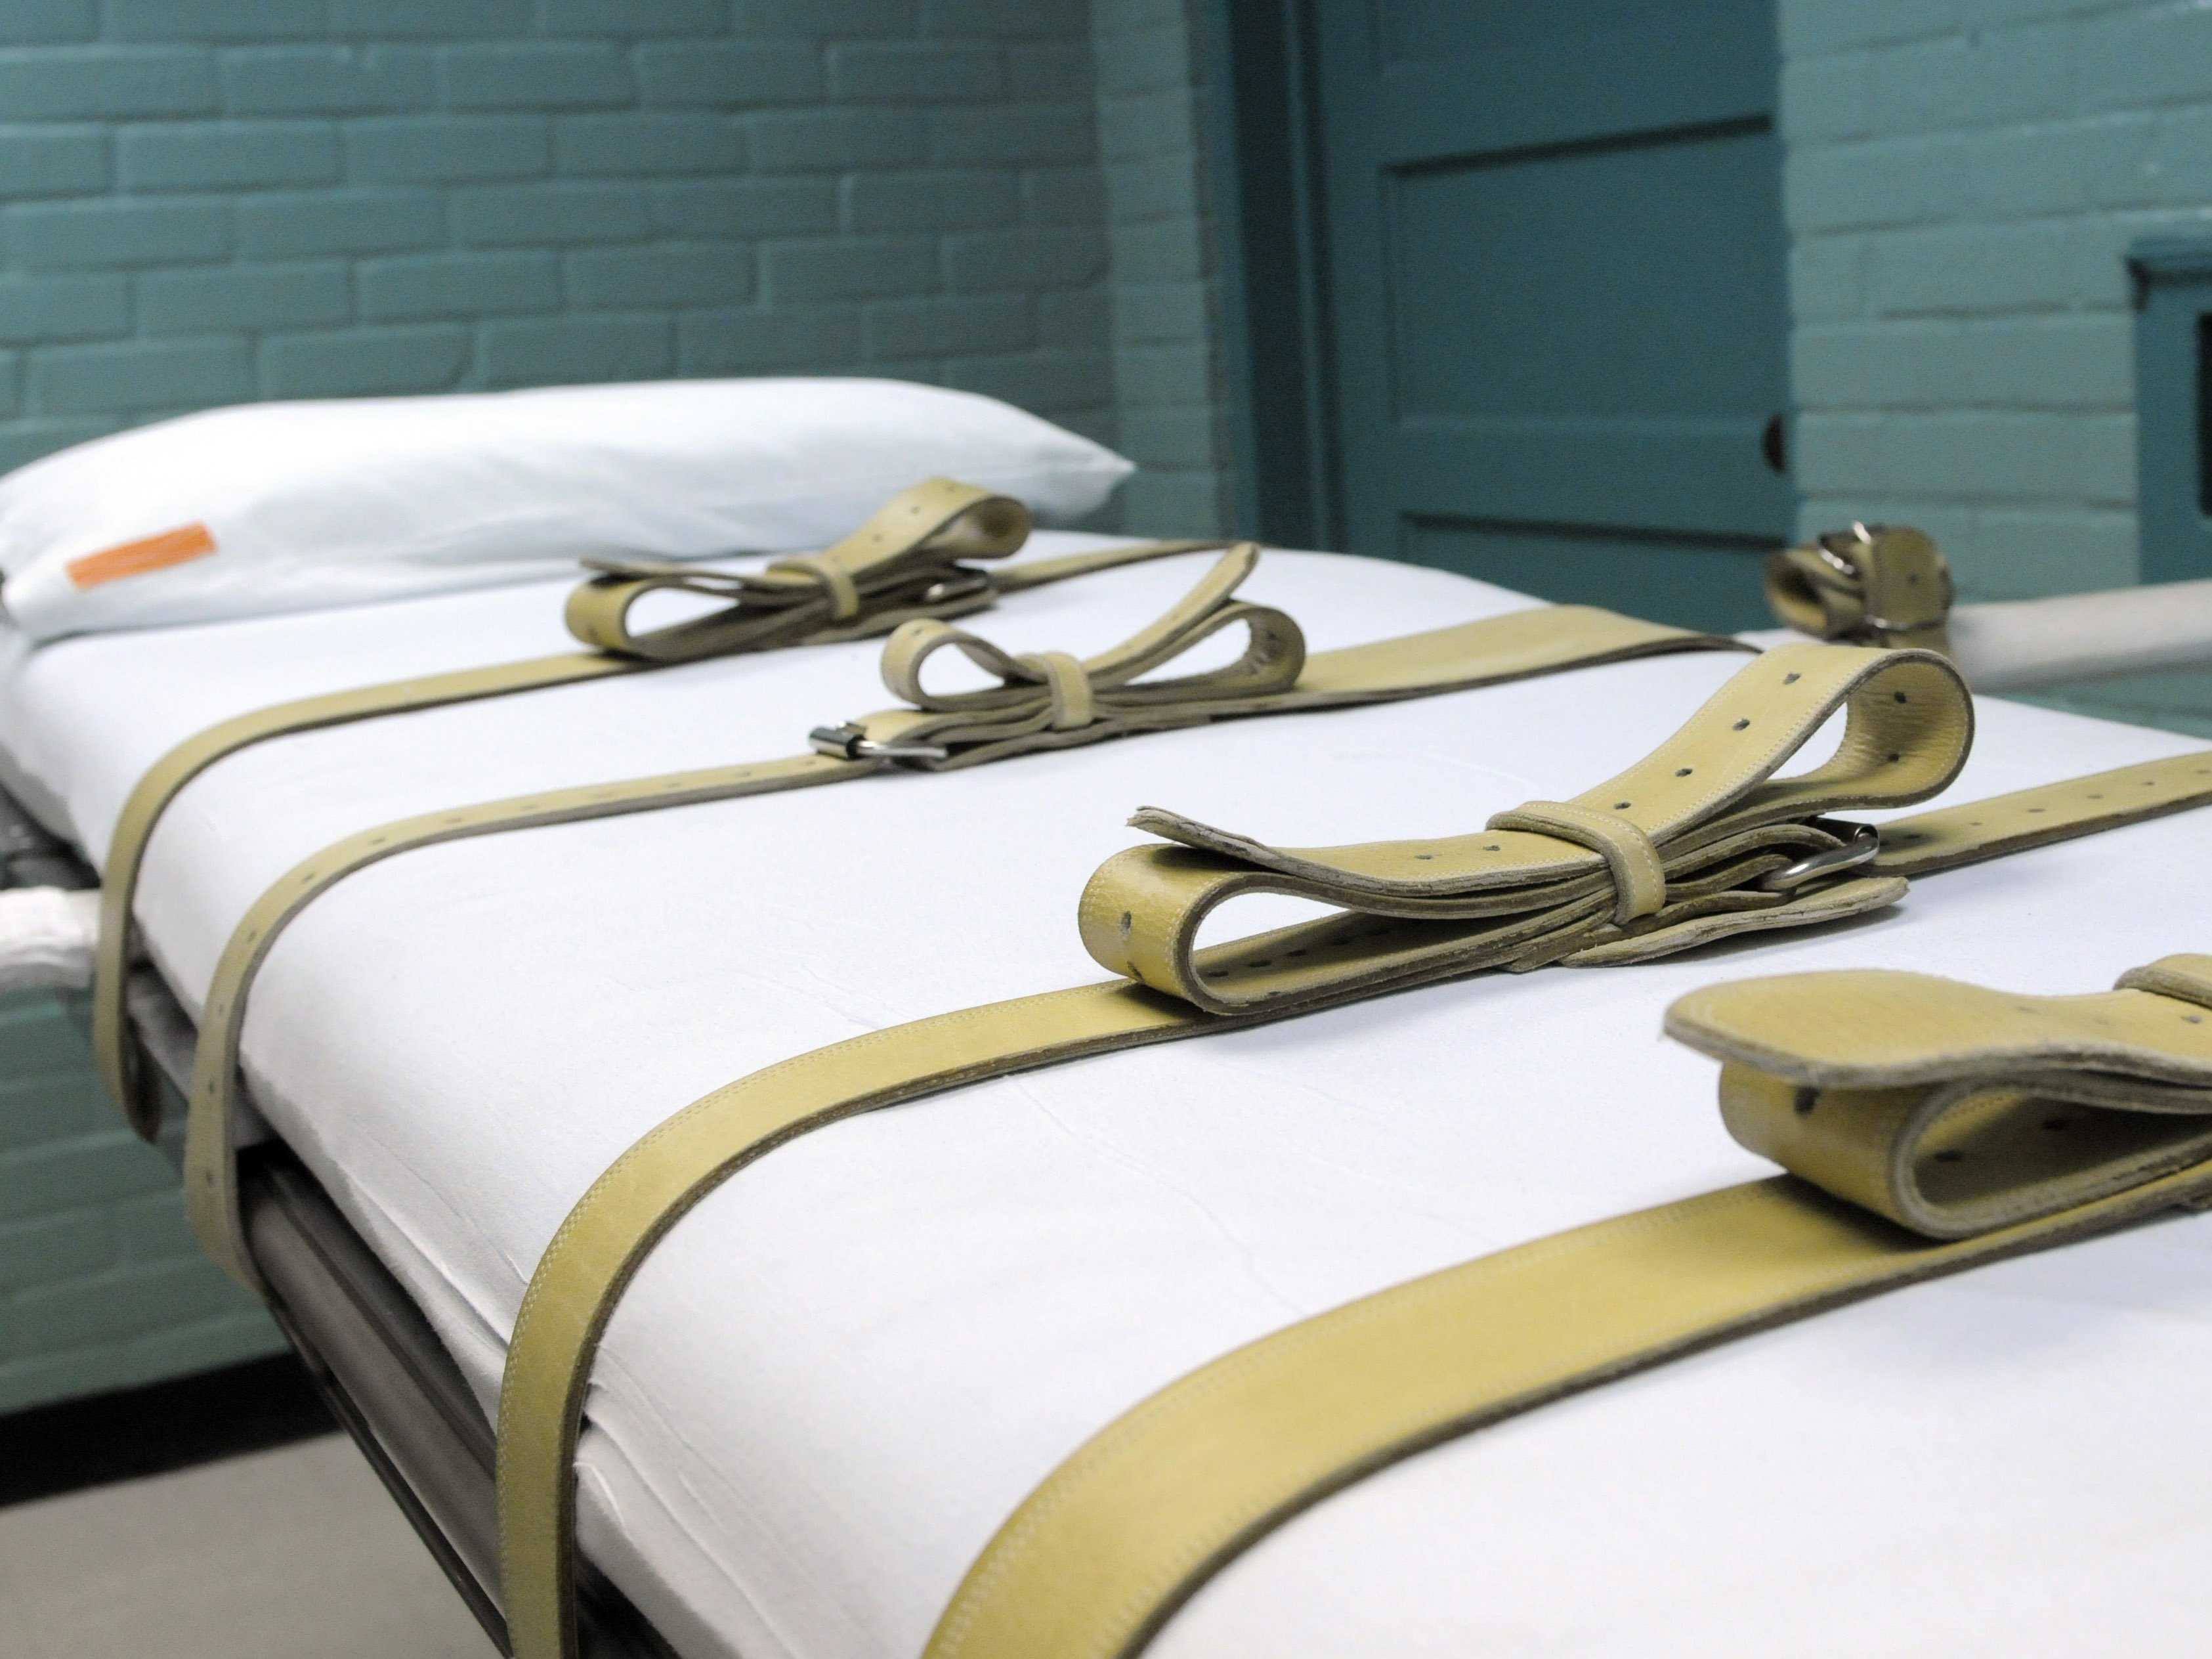 Arkansas Kills Inmate In Latest Of Several Planned Executions